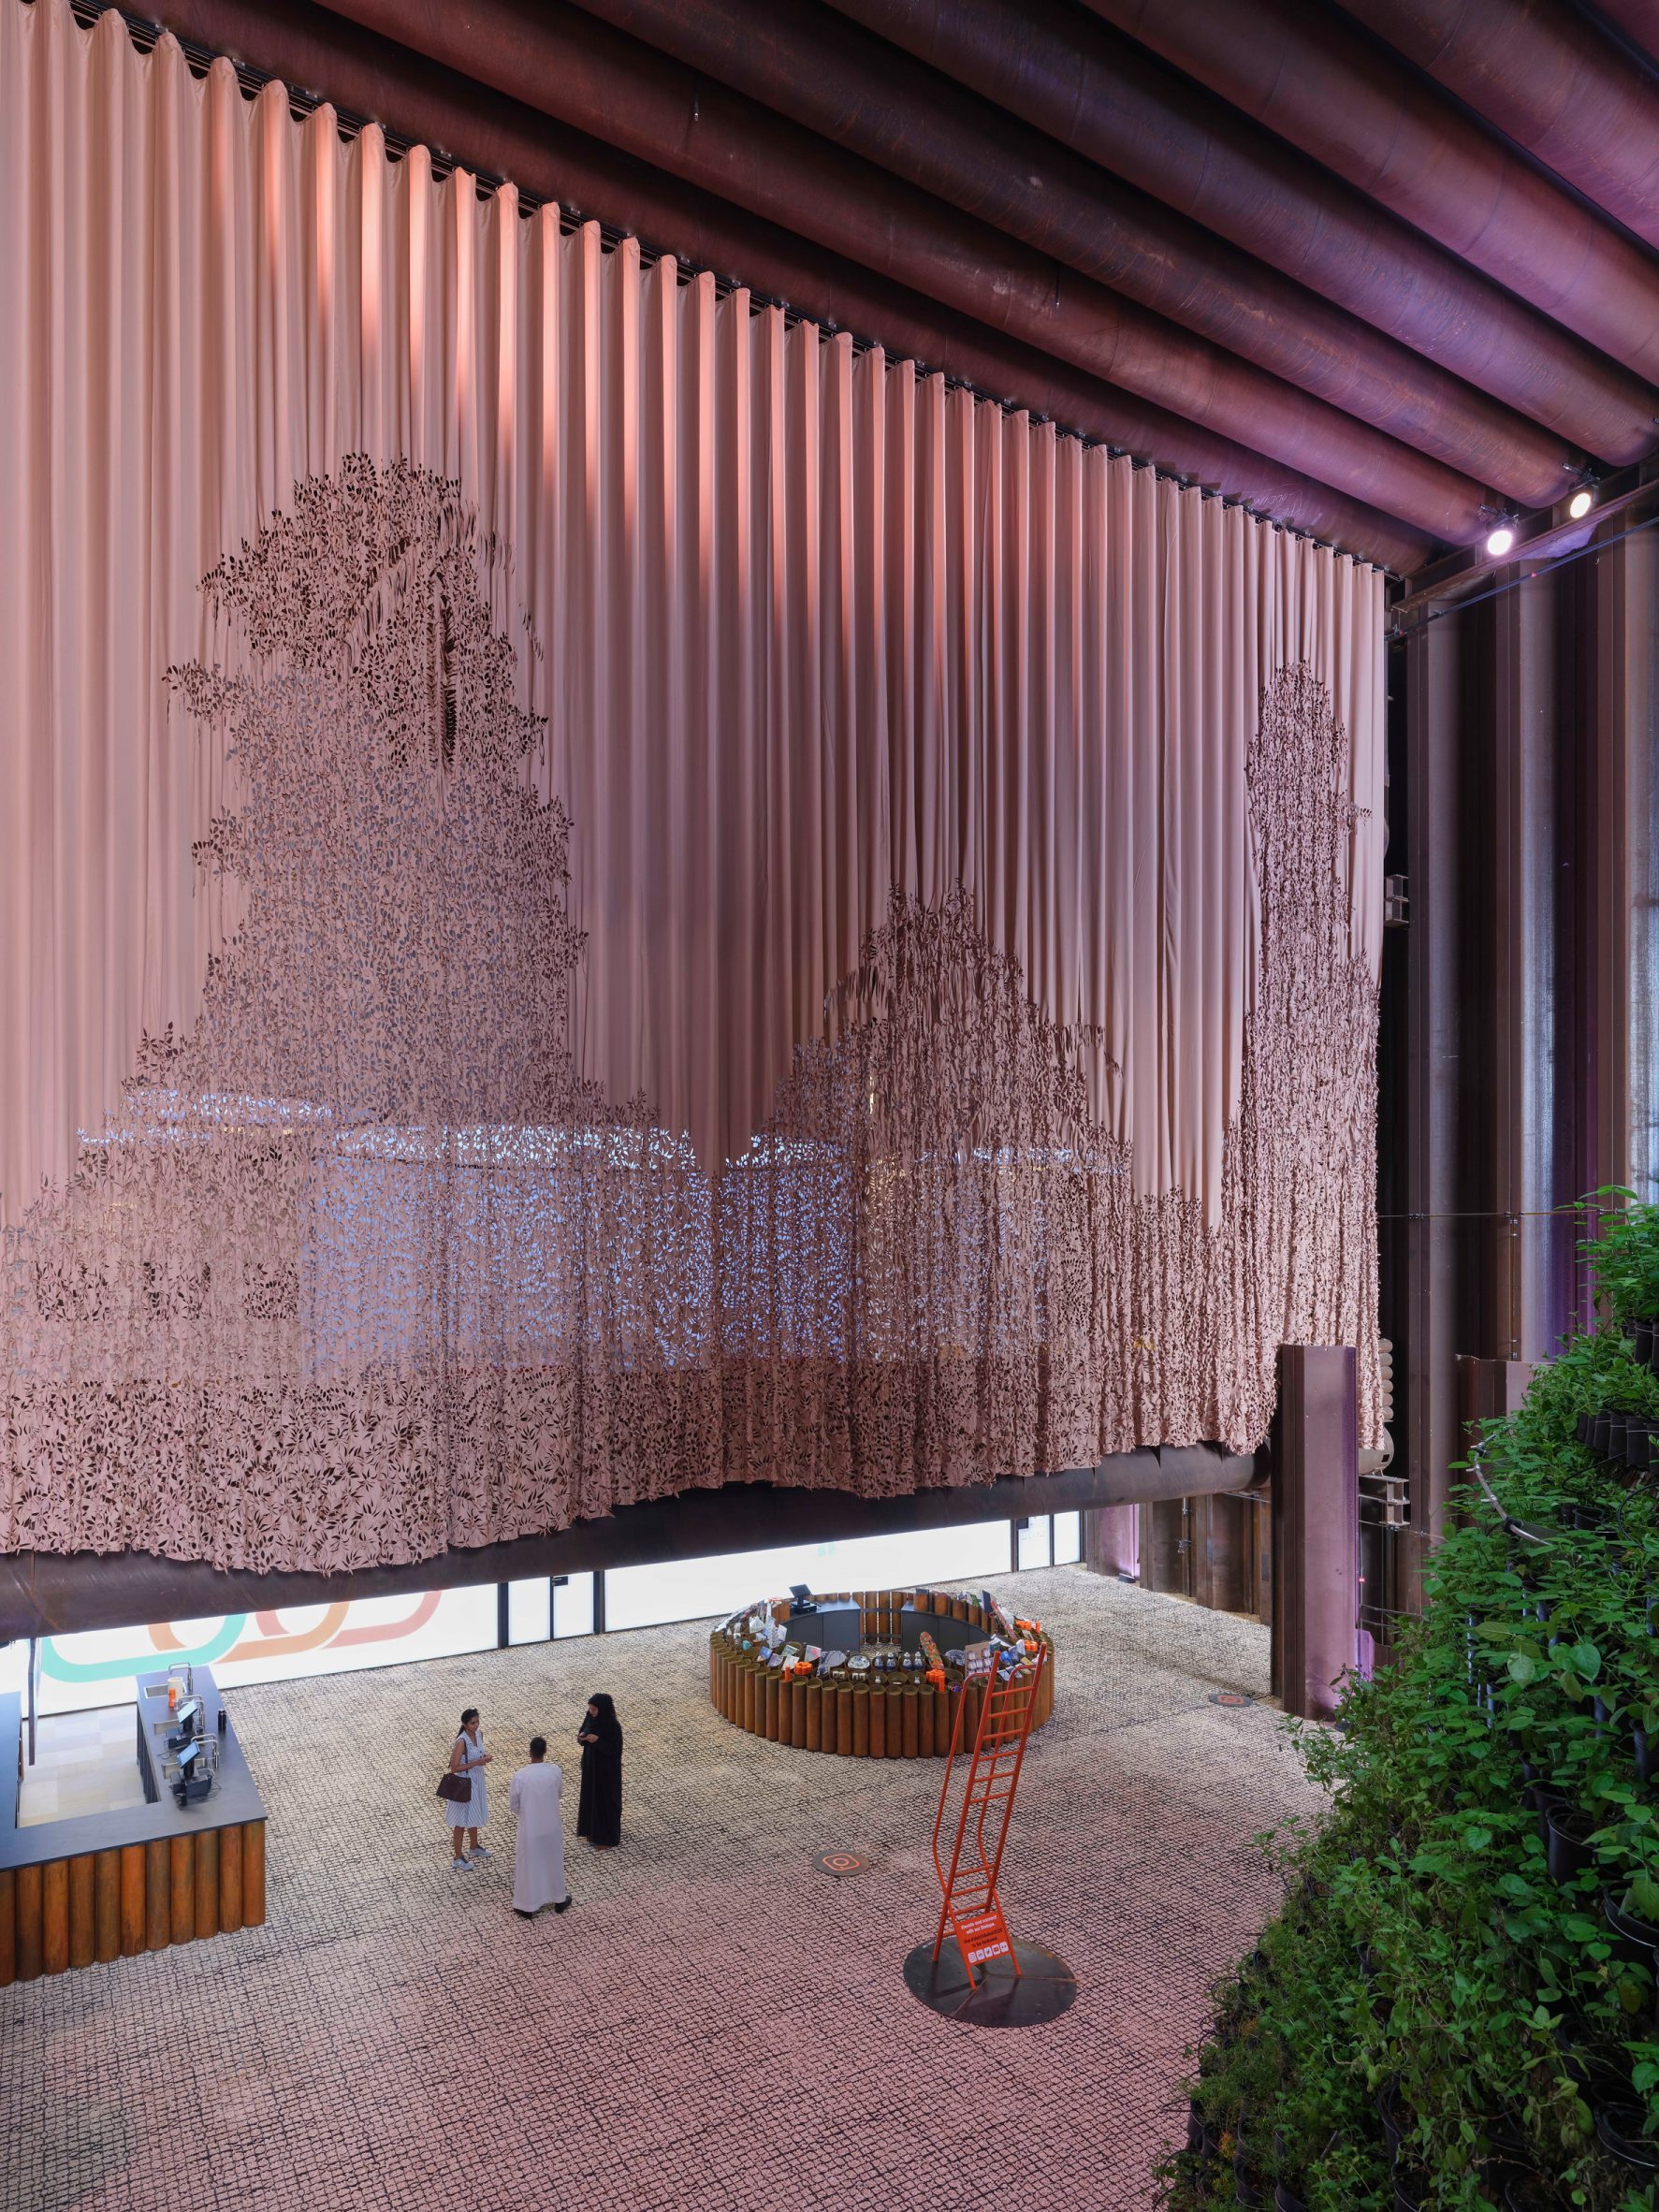 Beige patterned curtain divides exhibition space in the Dutch Biotope pavilion